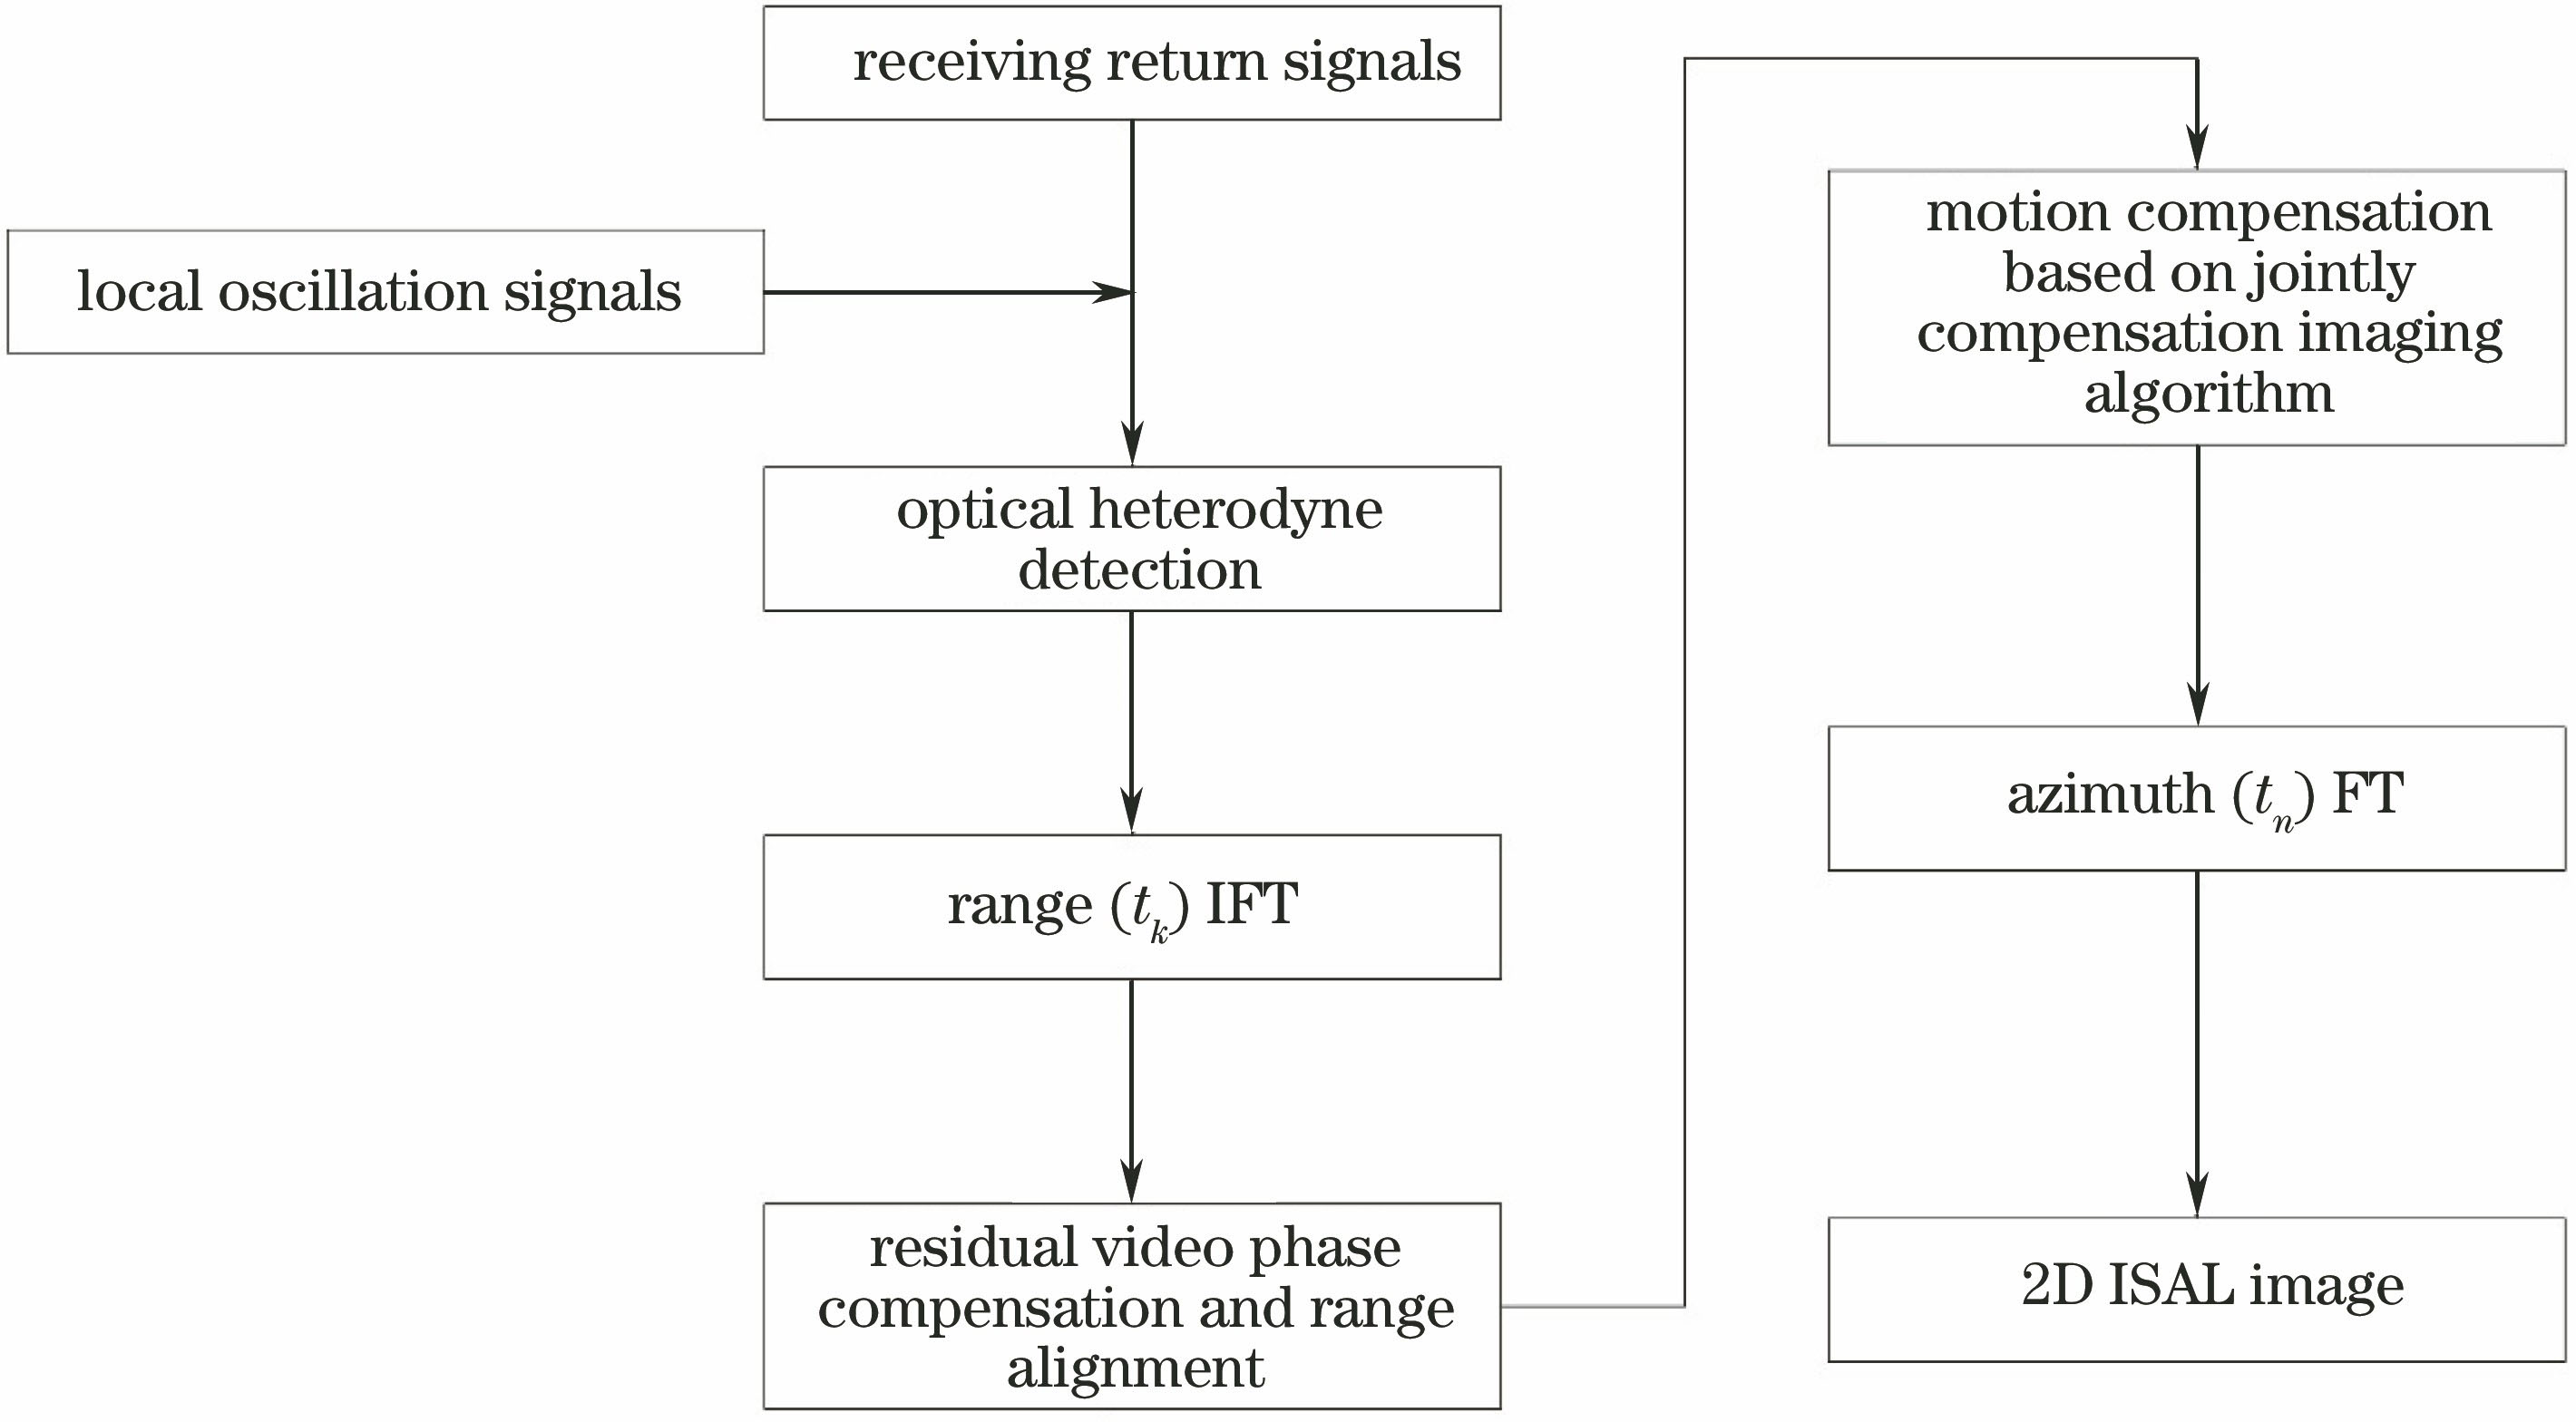 Basic flowchart of the imaging process for ISAL